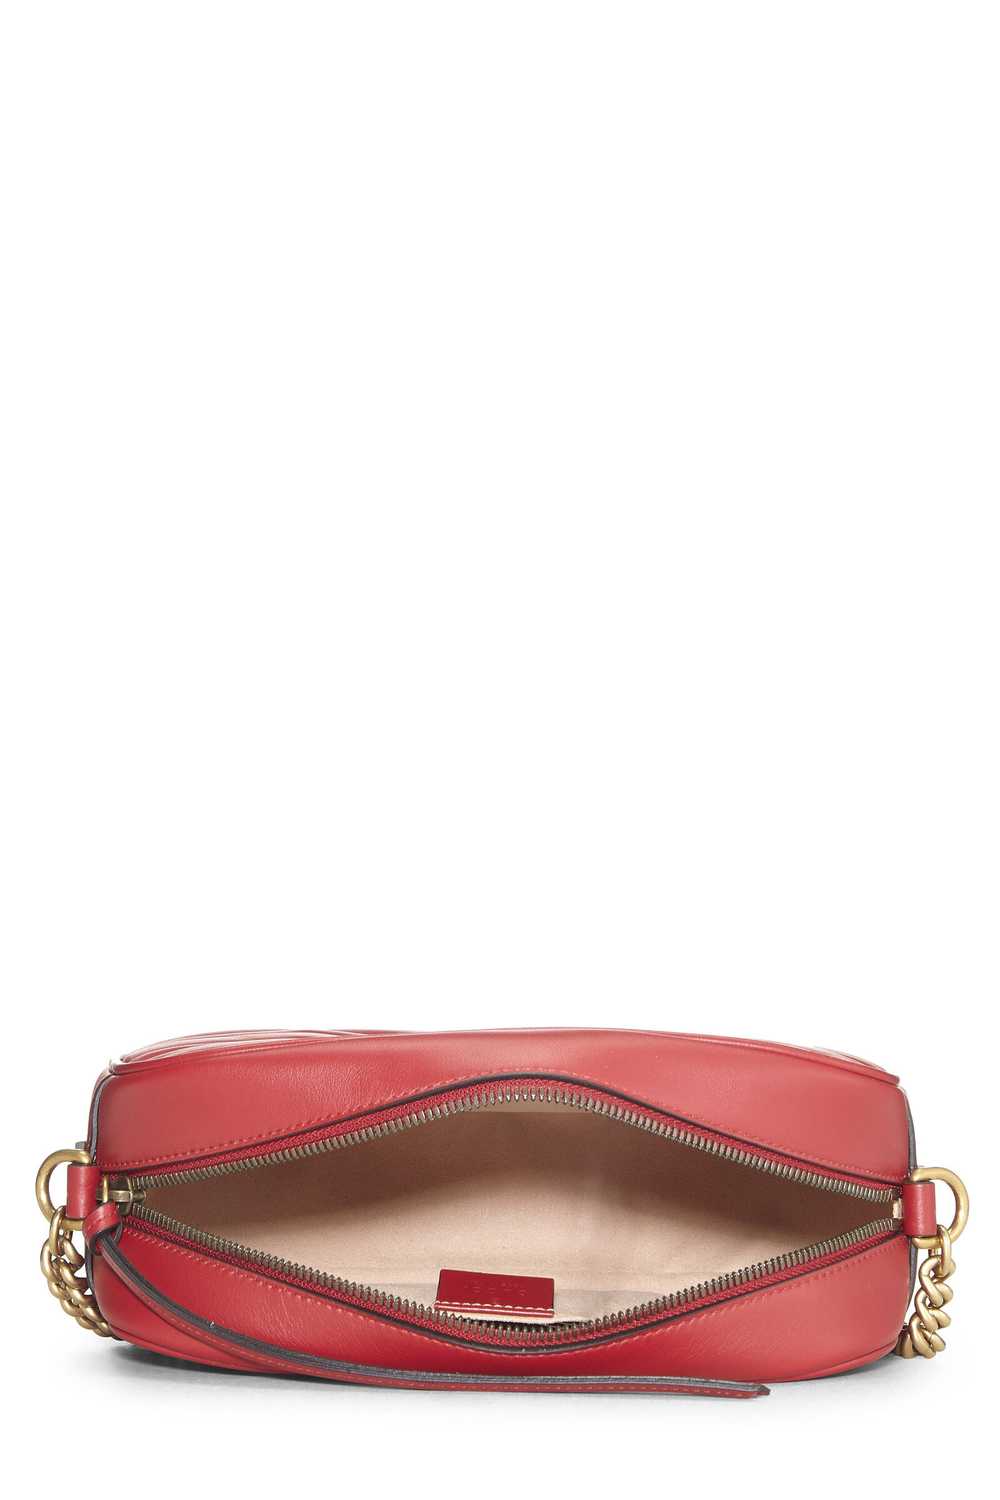 Red Leather GG Marmont Crossbody Bag Small - image 6